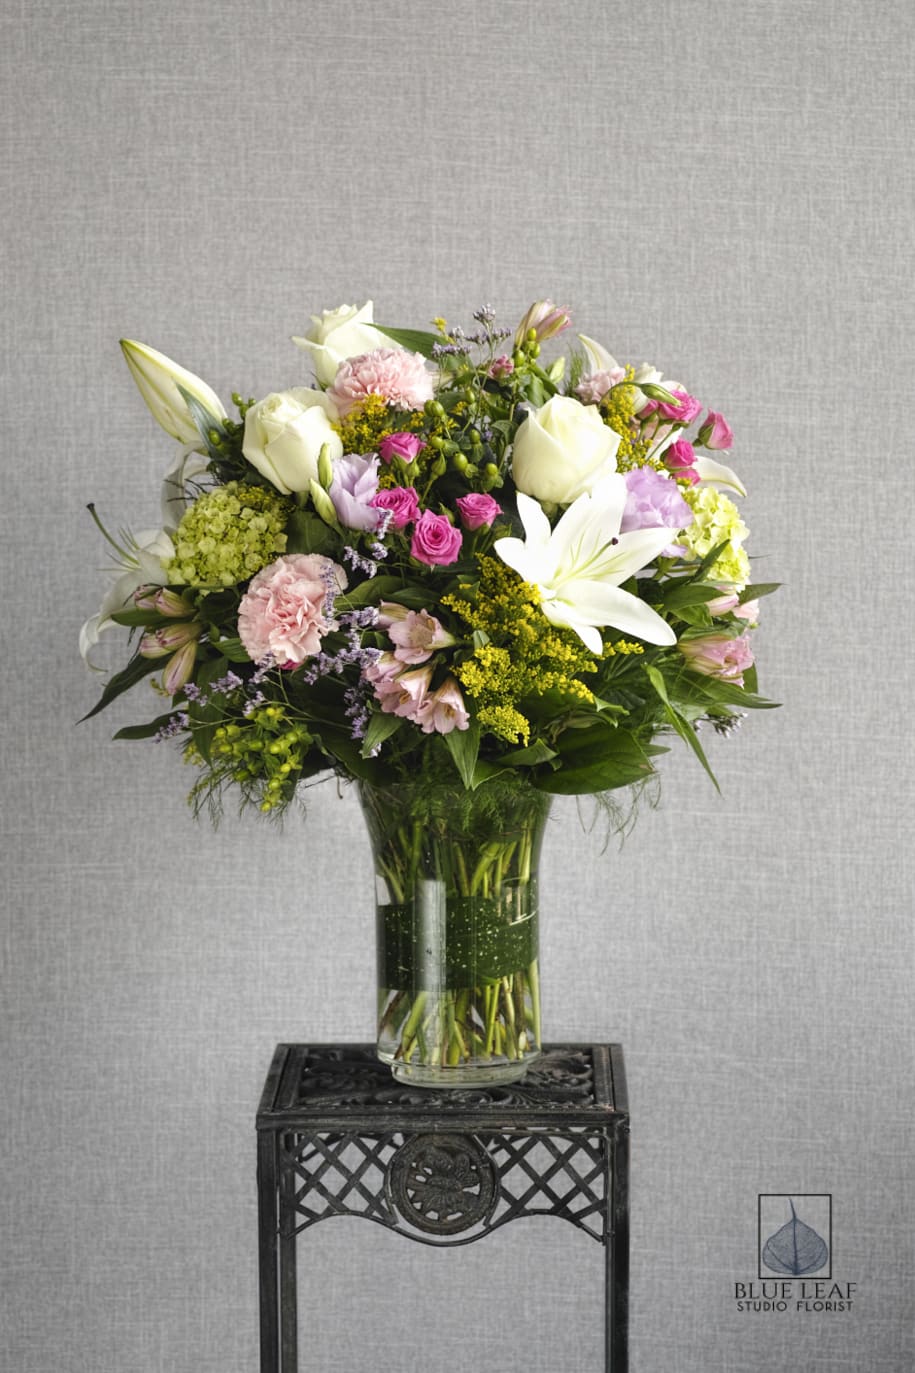 Sweet Garden Mix - This bouquet is a lovely mixture of sweet heart roses, large roses, lilies, soft pink carnations and seasonal accent flowers. A fabulous choice for any occasion.